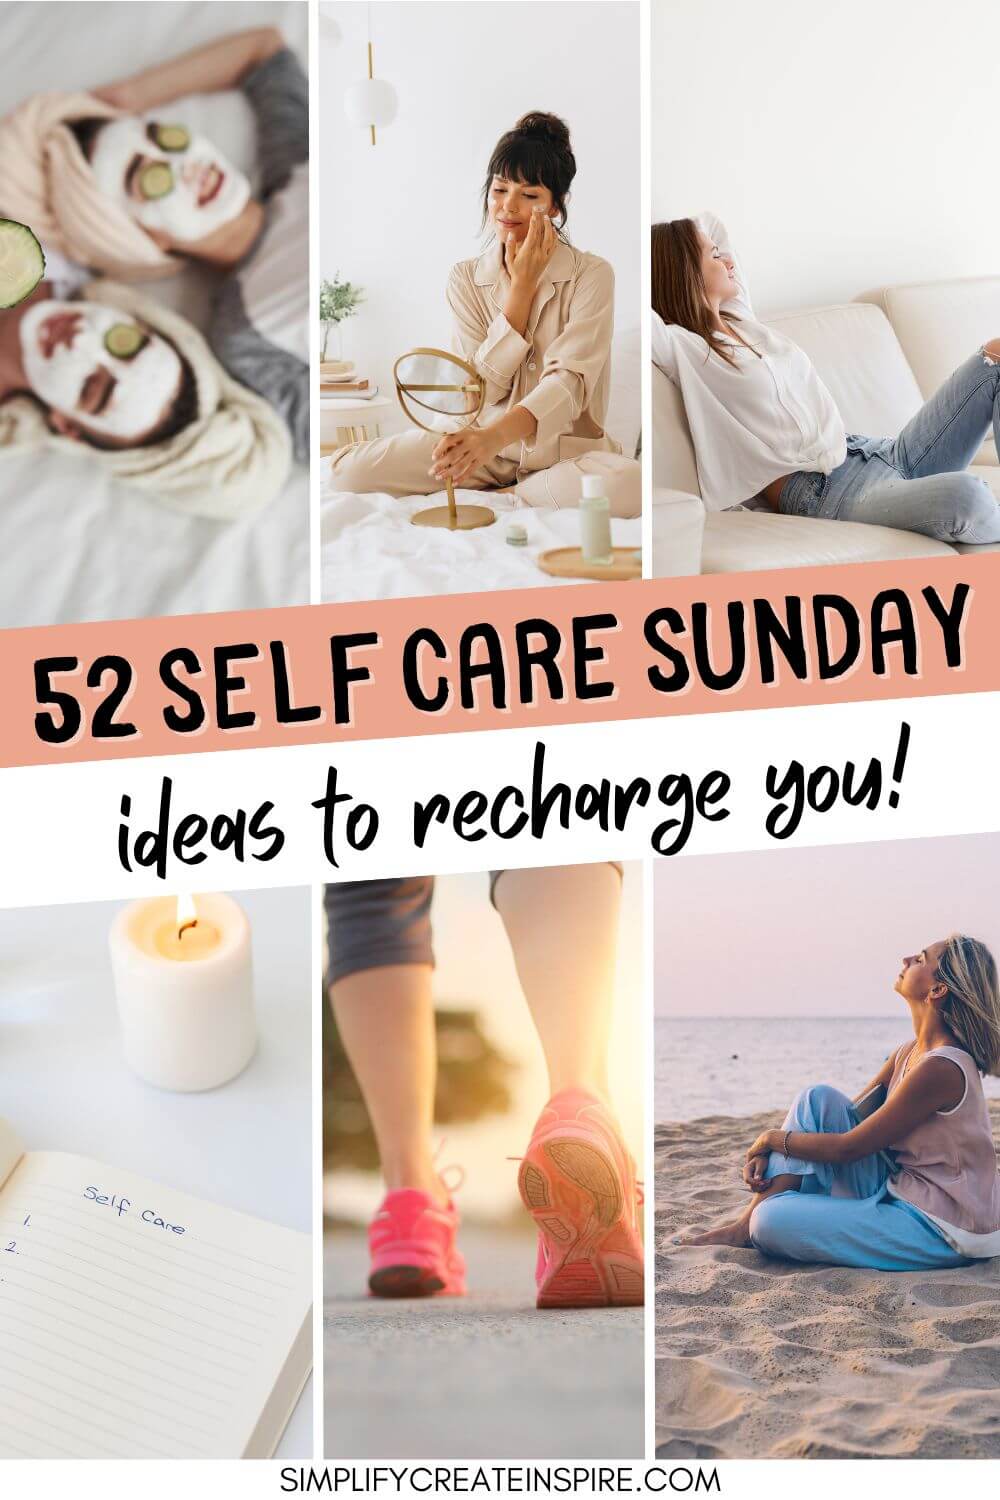 Pinterest image - sunday self care ideas to recharge you